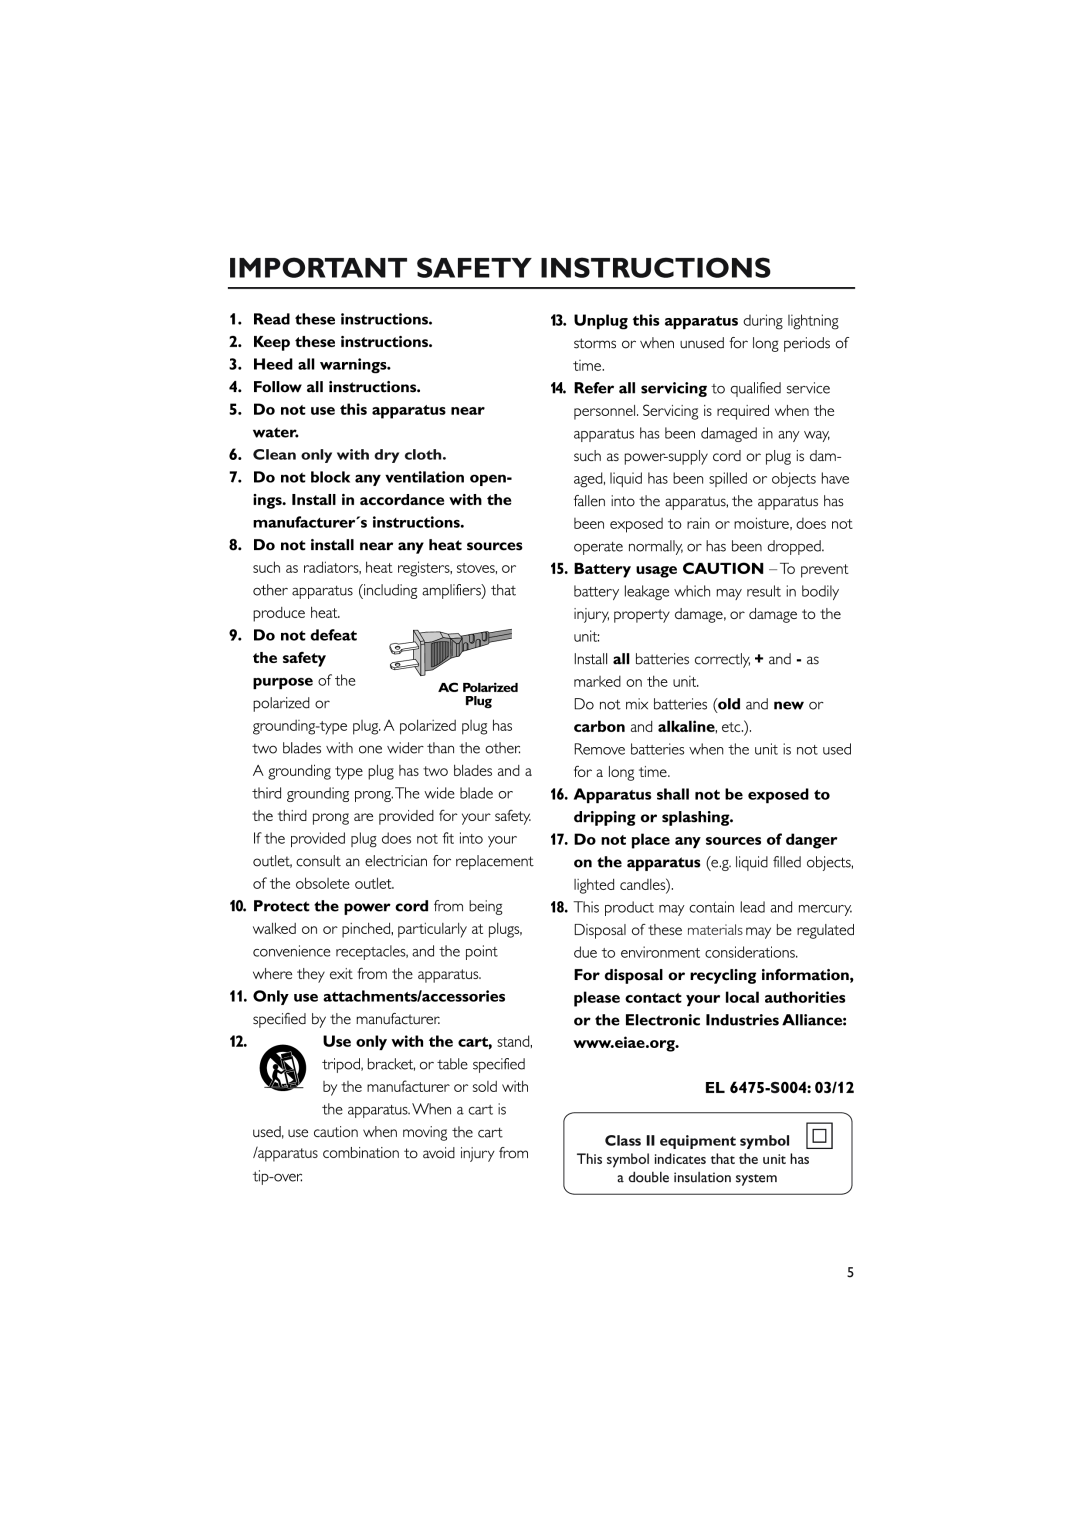 Philips MCM276R owner manual Important Safety Instructions, Clean only with dry cloth, Class II equipment symbol 